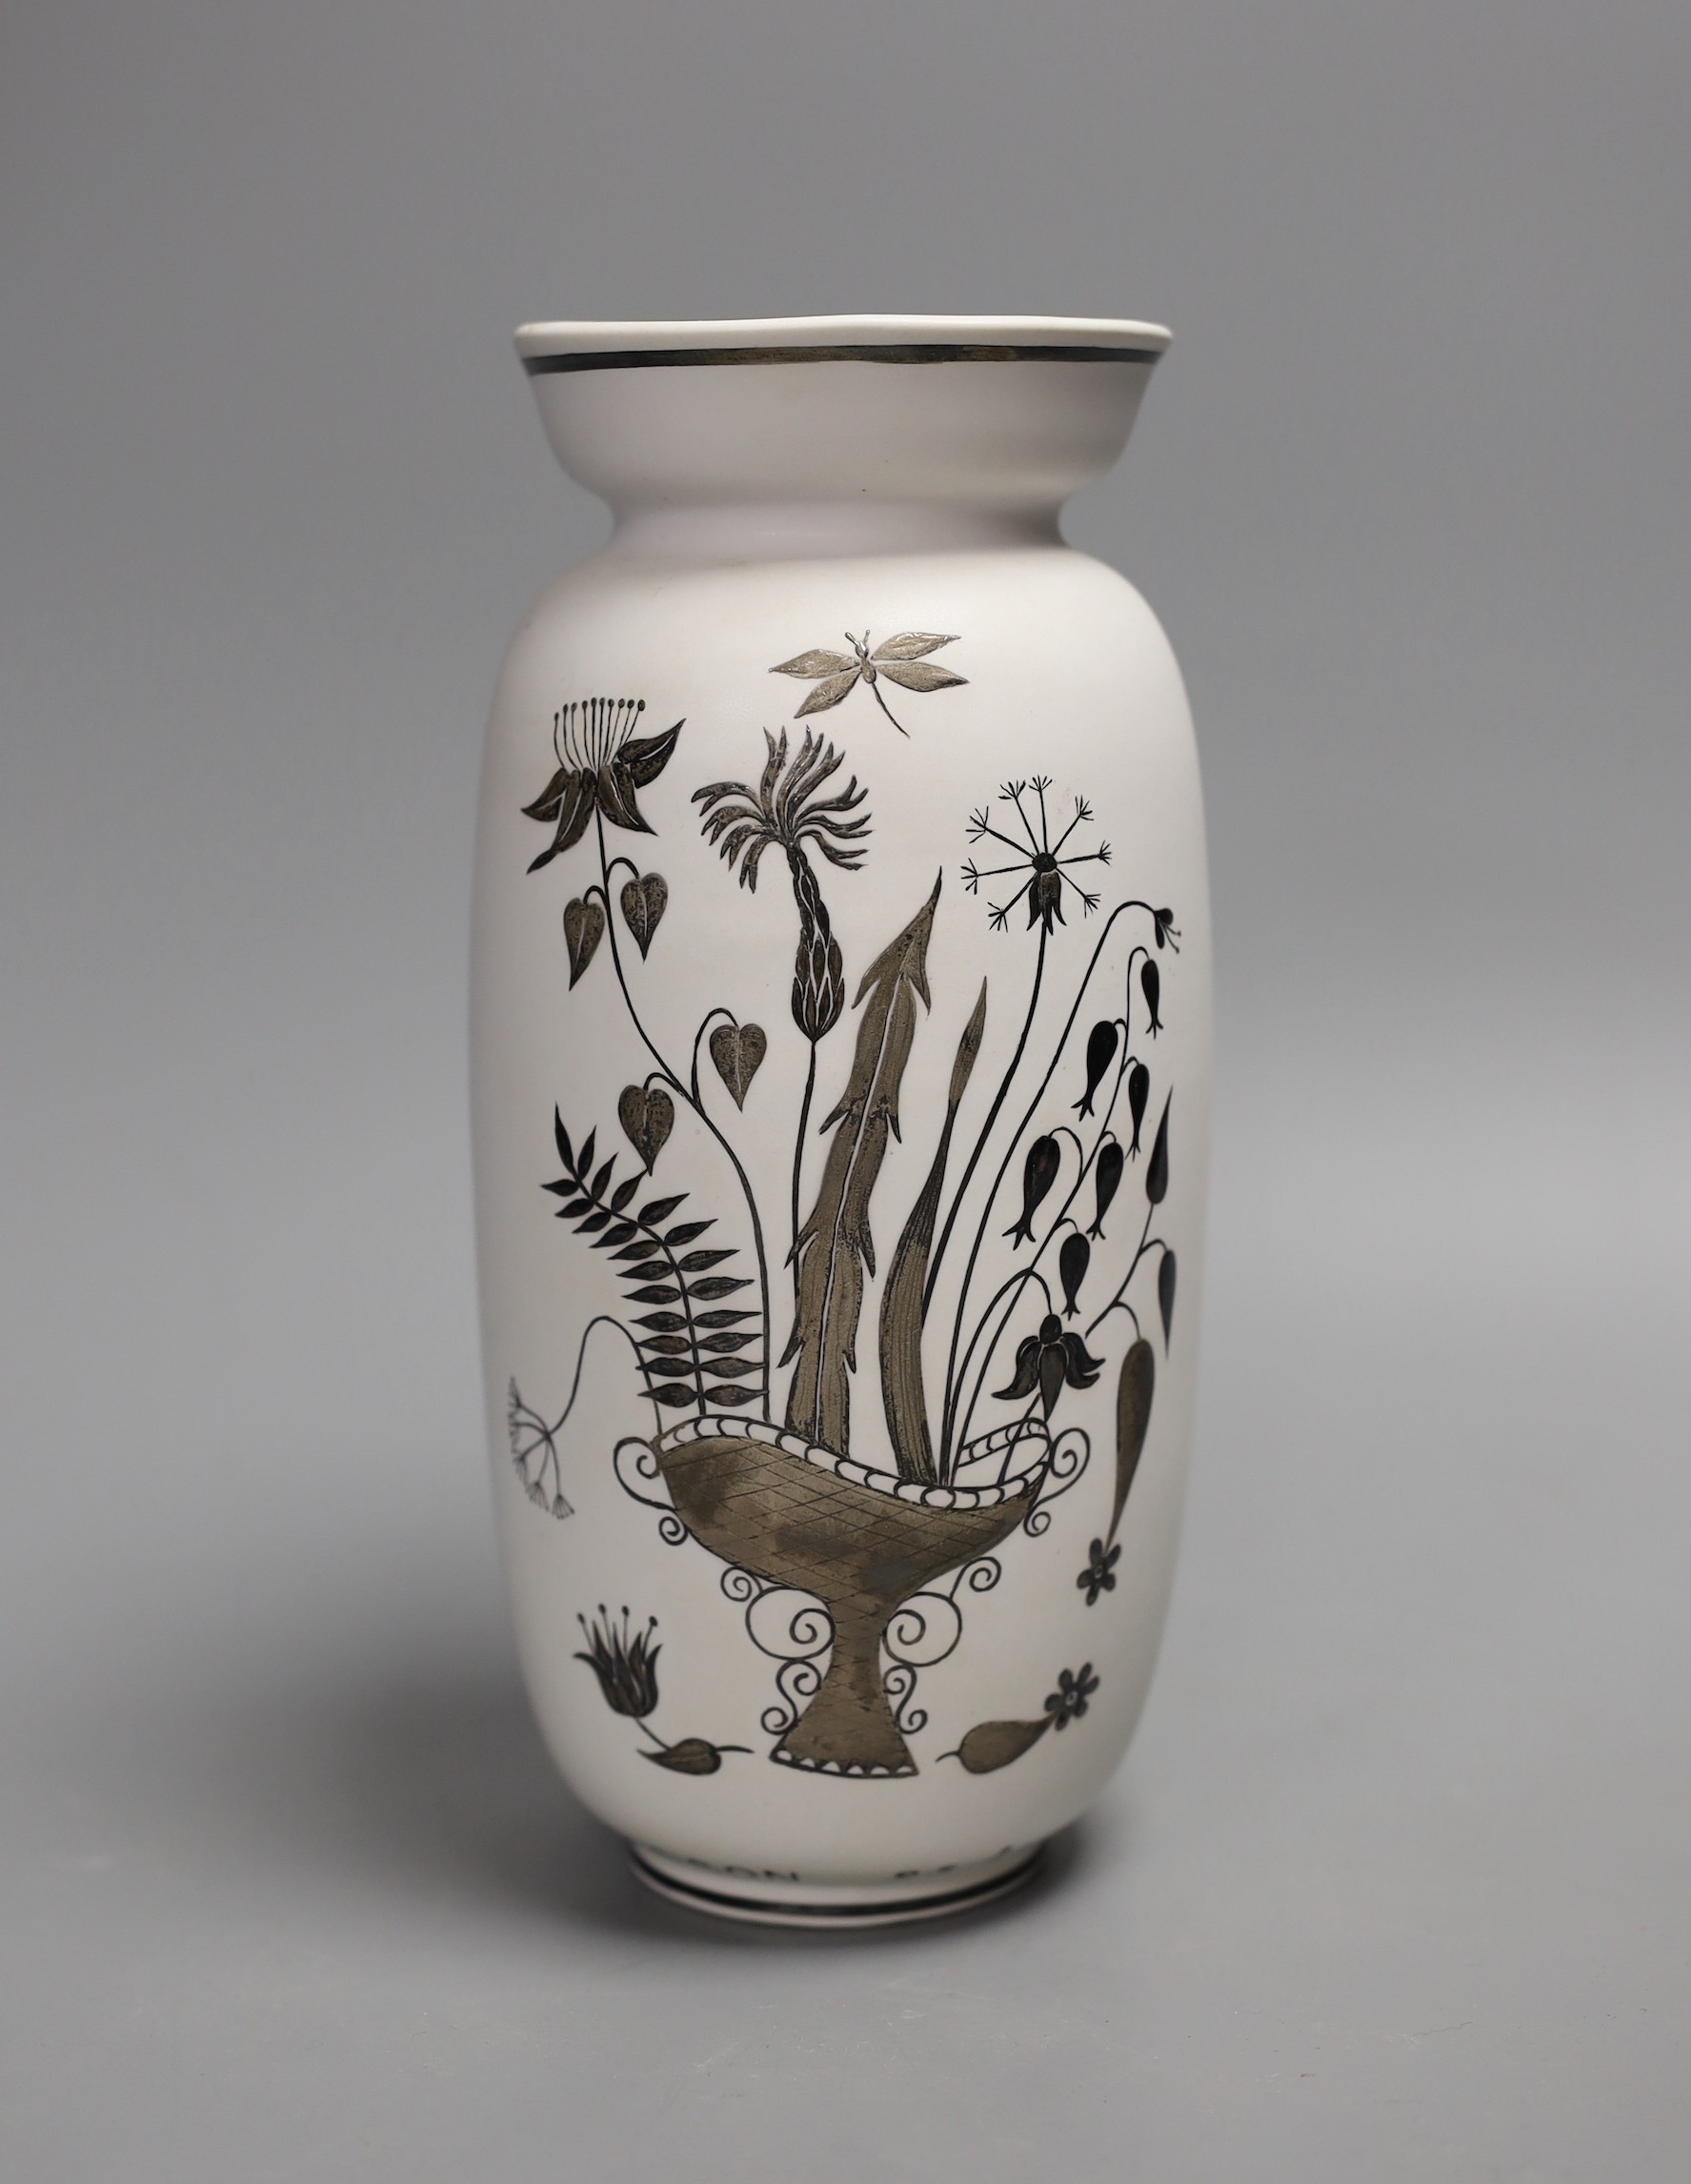 A Gustavsberg Stig Lindberg 215 shape Grazia vase decorated with flowers and inscribed 'Ingrid Axelsson 25 AR I Konsum', 20cm tall